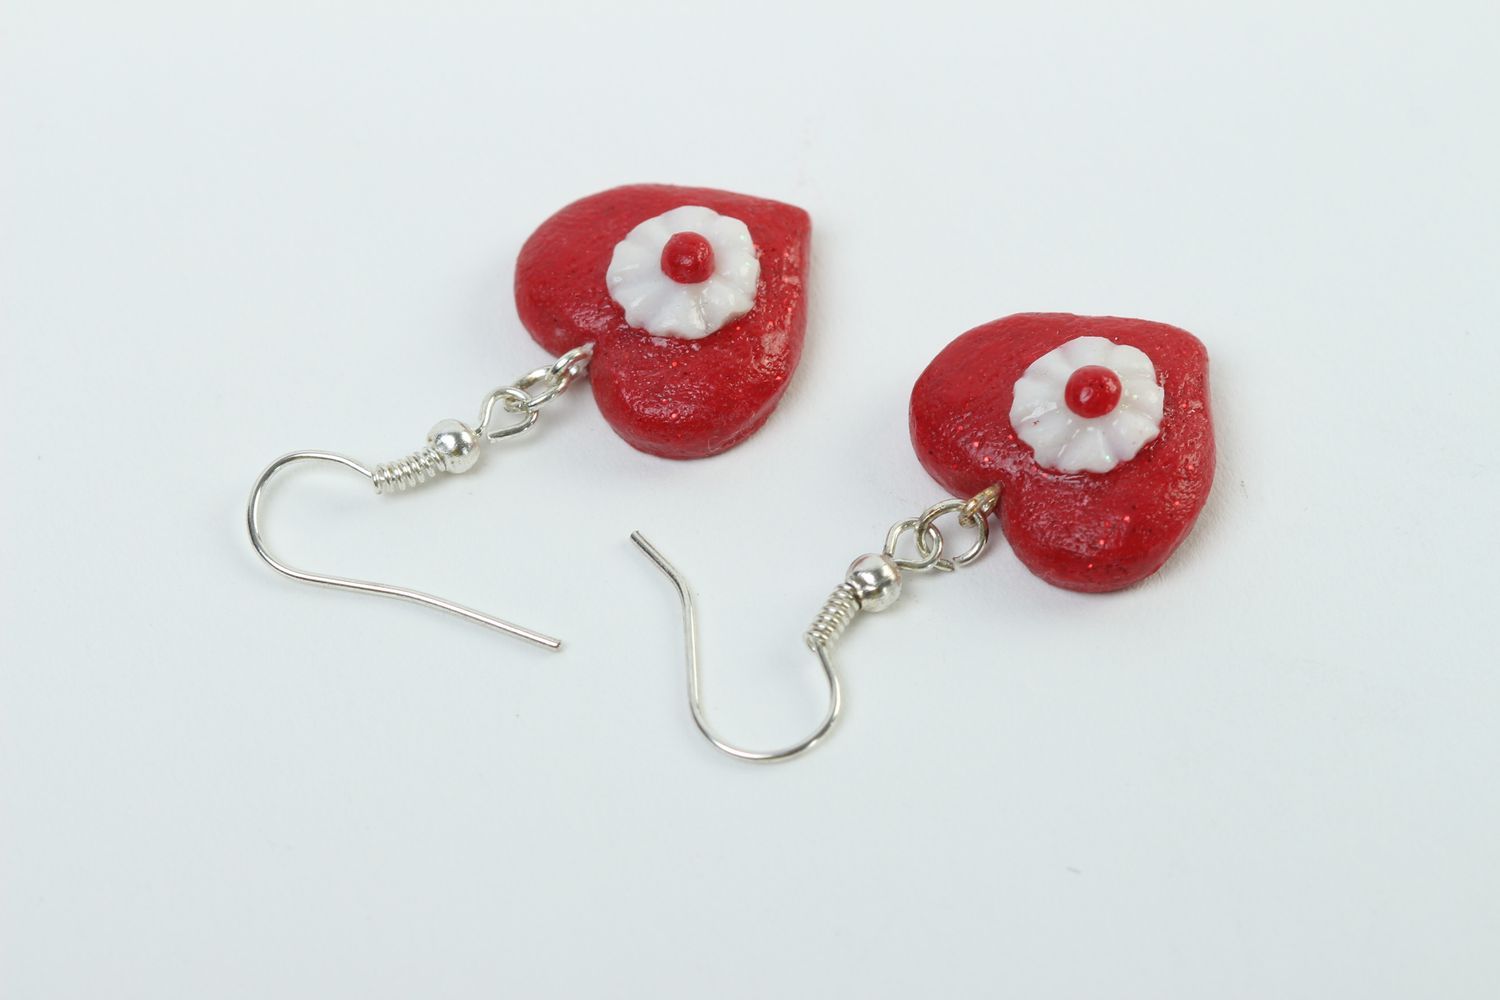 Plastic earrings with charms polymer clay earrings handmade fashion jewelry photo 4